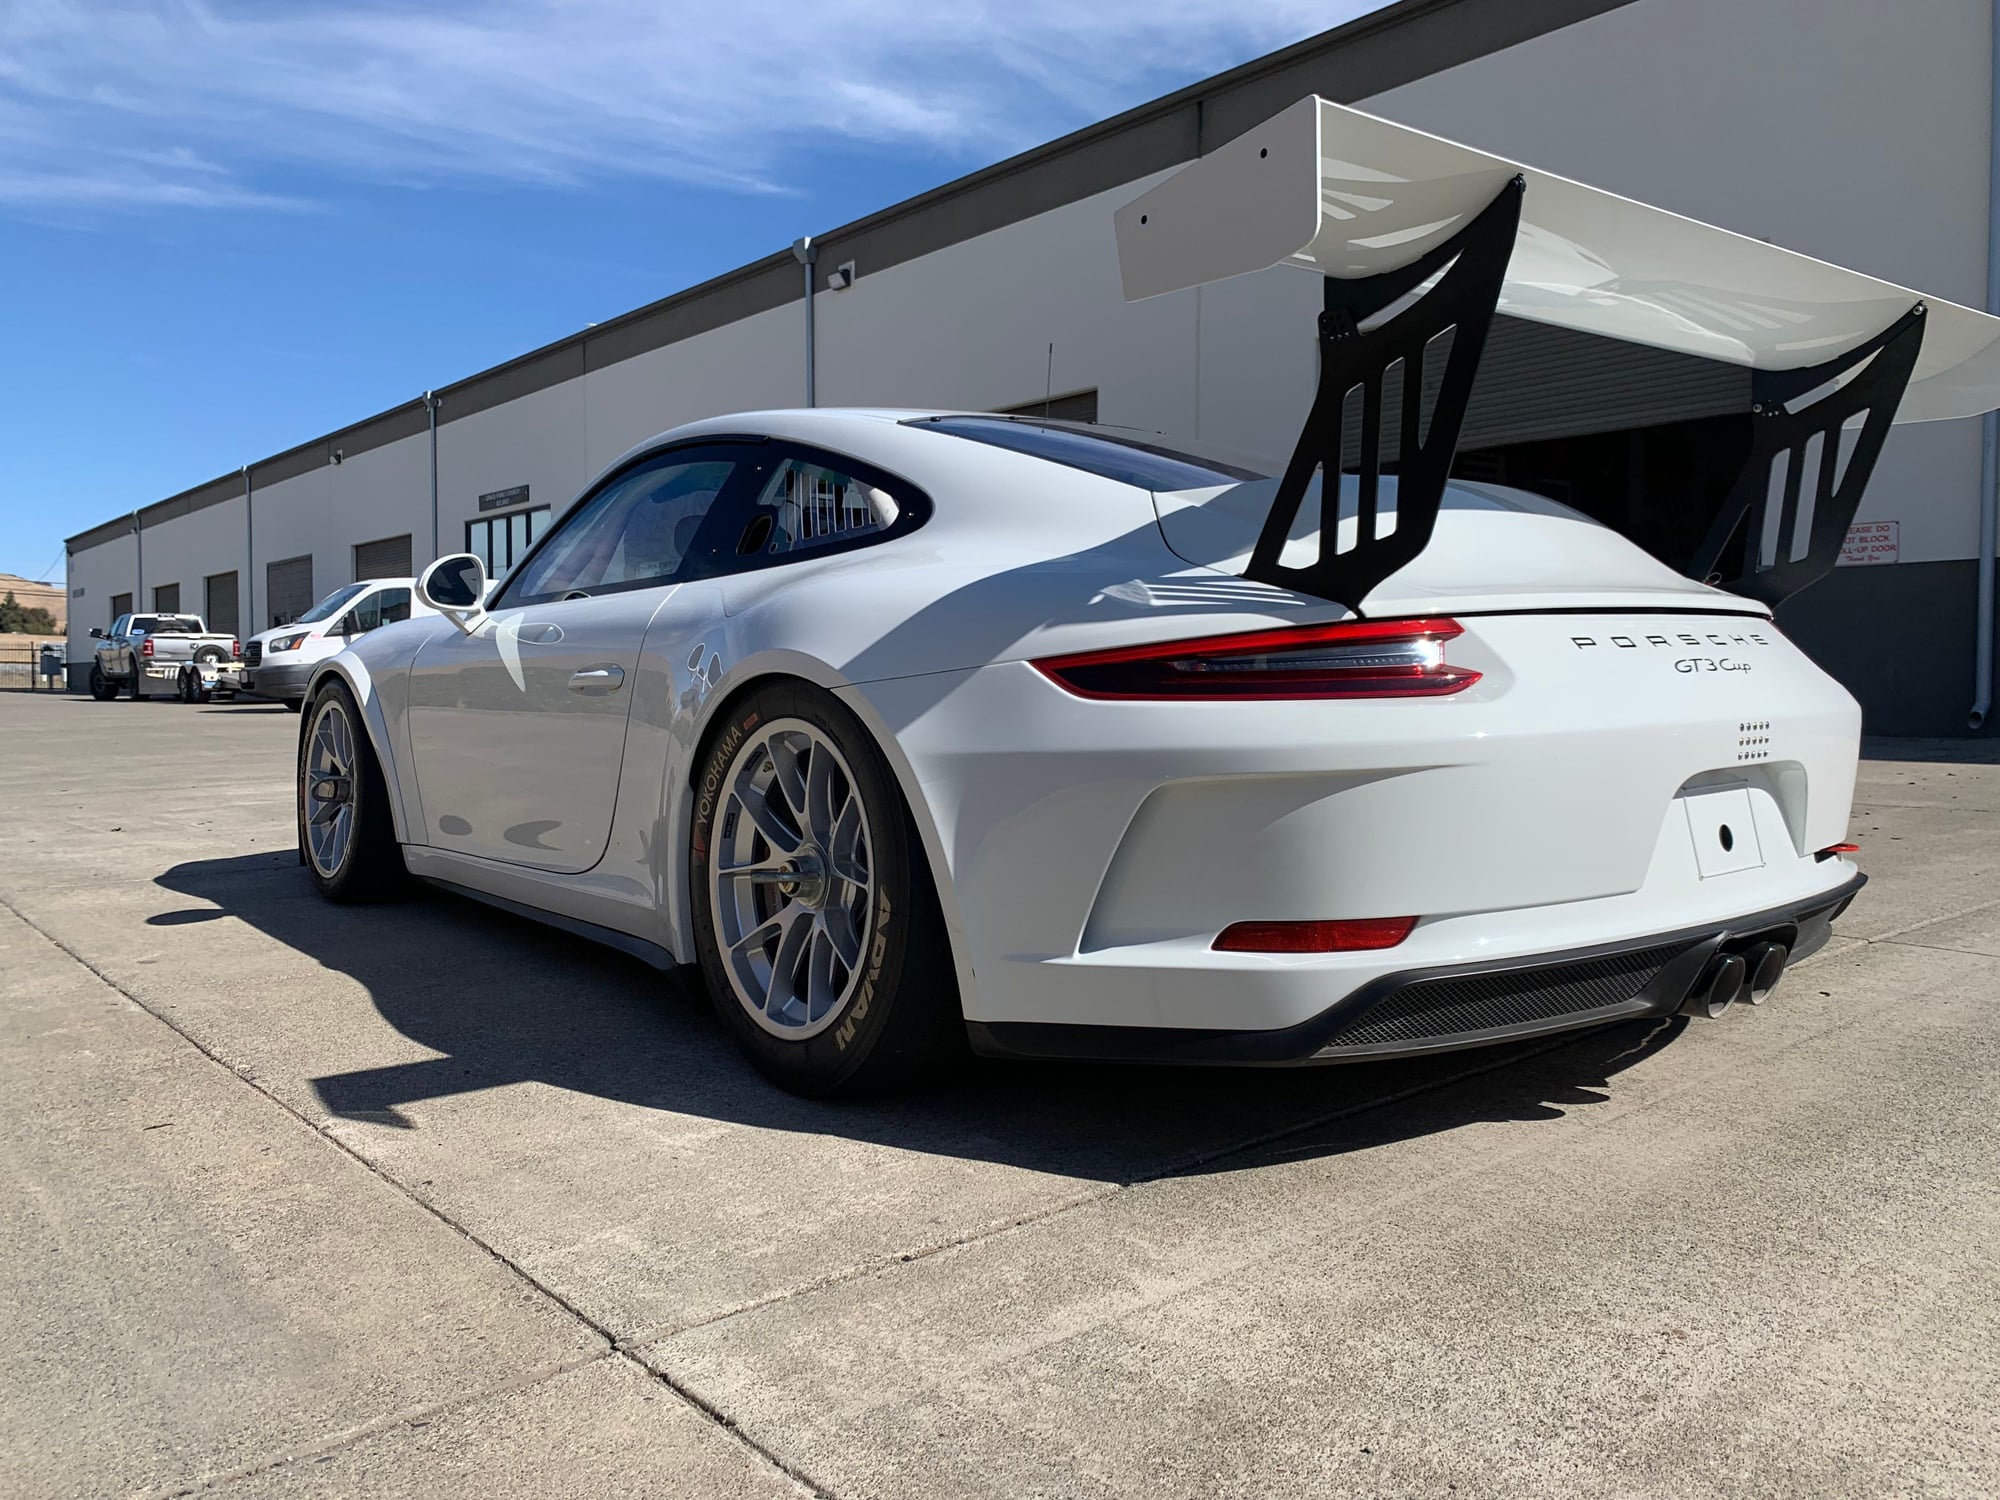 2019 Porsche GT3 - 2019 991.2 GT3 Cup, track days only, 25 hour chassis, 0 hour engine - Used - VIN WP0ZZZ99ZKS198304 - Incline Village, NV 89451, United States